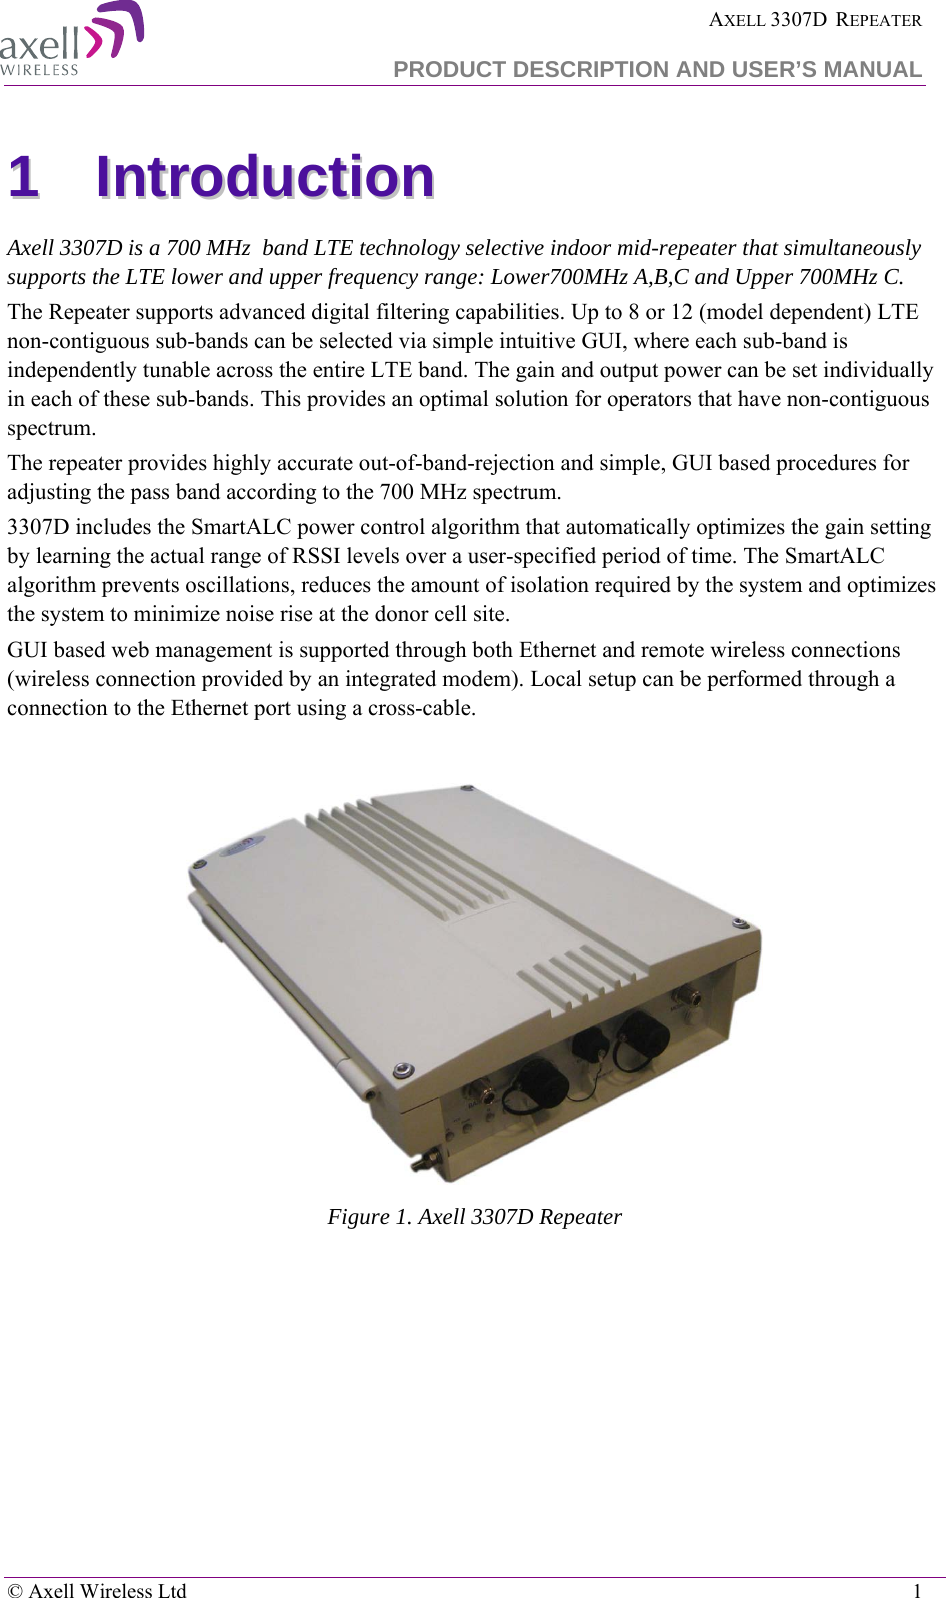  AXELL 3307D  REPEATER PRODUCT DESCRIPTION AND USER’S MANUAL  © Axell Wireless Ltd    1 11  IInnttrroodduuccttiioonn    Axell 3307D is a 700 MHz  band LTE technology selective indoor mid-repeater that simultaneously supports the LTE lower and upper frequency range: Lower700MHz A,B,C and Upper 700MHz C. The Repeater supports advanced digital filtering capabilities. Up to 8 or 12 (model dependent) LTE non-contiguous sub-bands can be selected via simple intuitive GUI, where each sub-band is independently tunable across the entire LTE band. The gain and output power can be set individually in each of these sub-bands. This provides an optimal solution for operators that have non-contiguous spectrum.  The repeater provides highly accurate out-of-band-rejection and simple, GUI based procedures for adjusting the pass band according to the 700 MHz spectrum. 3307D includes the SmartALC power control algorithm that automatically optimizes the gain setting by learning the actual range of RSSI levels over a user-specified period of time. The SmartALC algorithm prevents oscillations, reduces the amount of isolation required by the system and optimizes the system to minimize noise rise at the donor cell site.  GUI based web management is supported through both Ethernet and remote wireless connections (wireless connection provided by an integrated modem). Local setup can be performed through a connection to the Ethernet port using a cross-cable.   Figure 1. Axell 3307D Repeater 